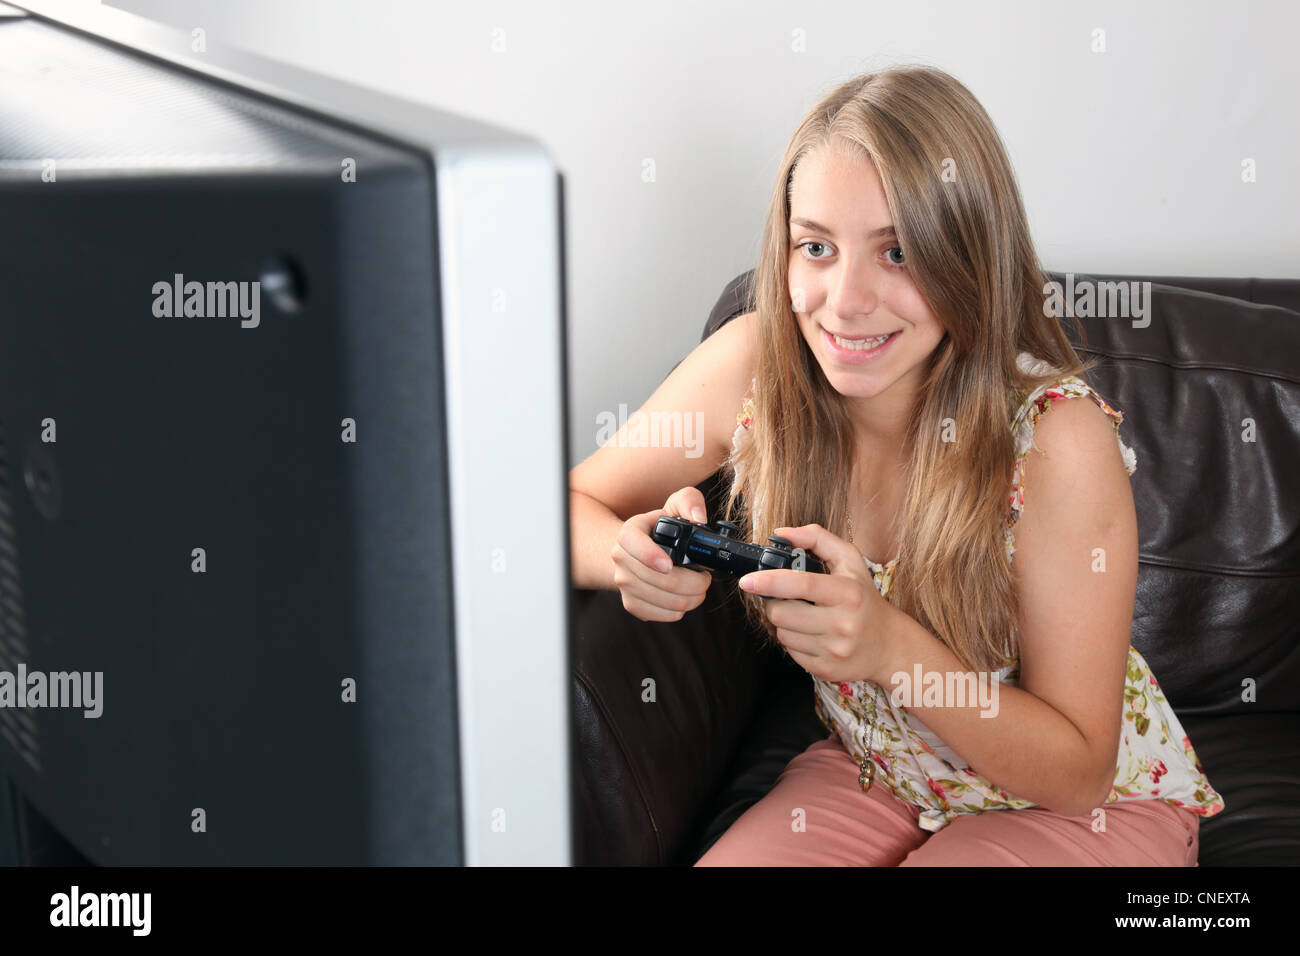 Young blonde female holding a controller, smiling while gaming (playstation/x-box) tv game. Stock Photo